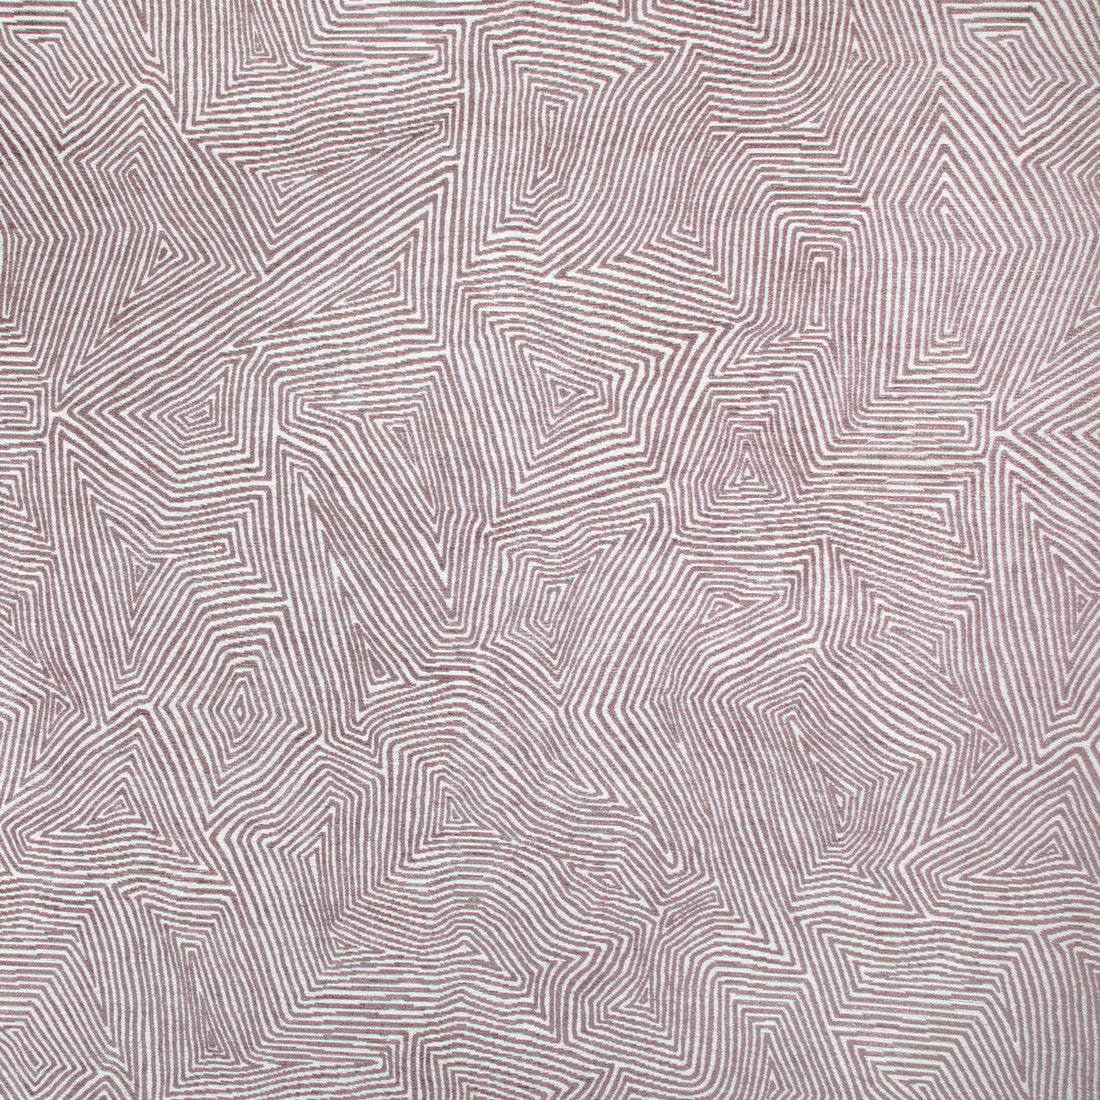 Dendera fabric in rose clay color - pattern 35849.17.0 - by Kravet Couture in the Windsor Smith Naila collection